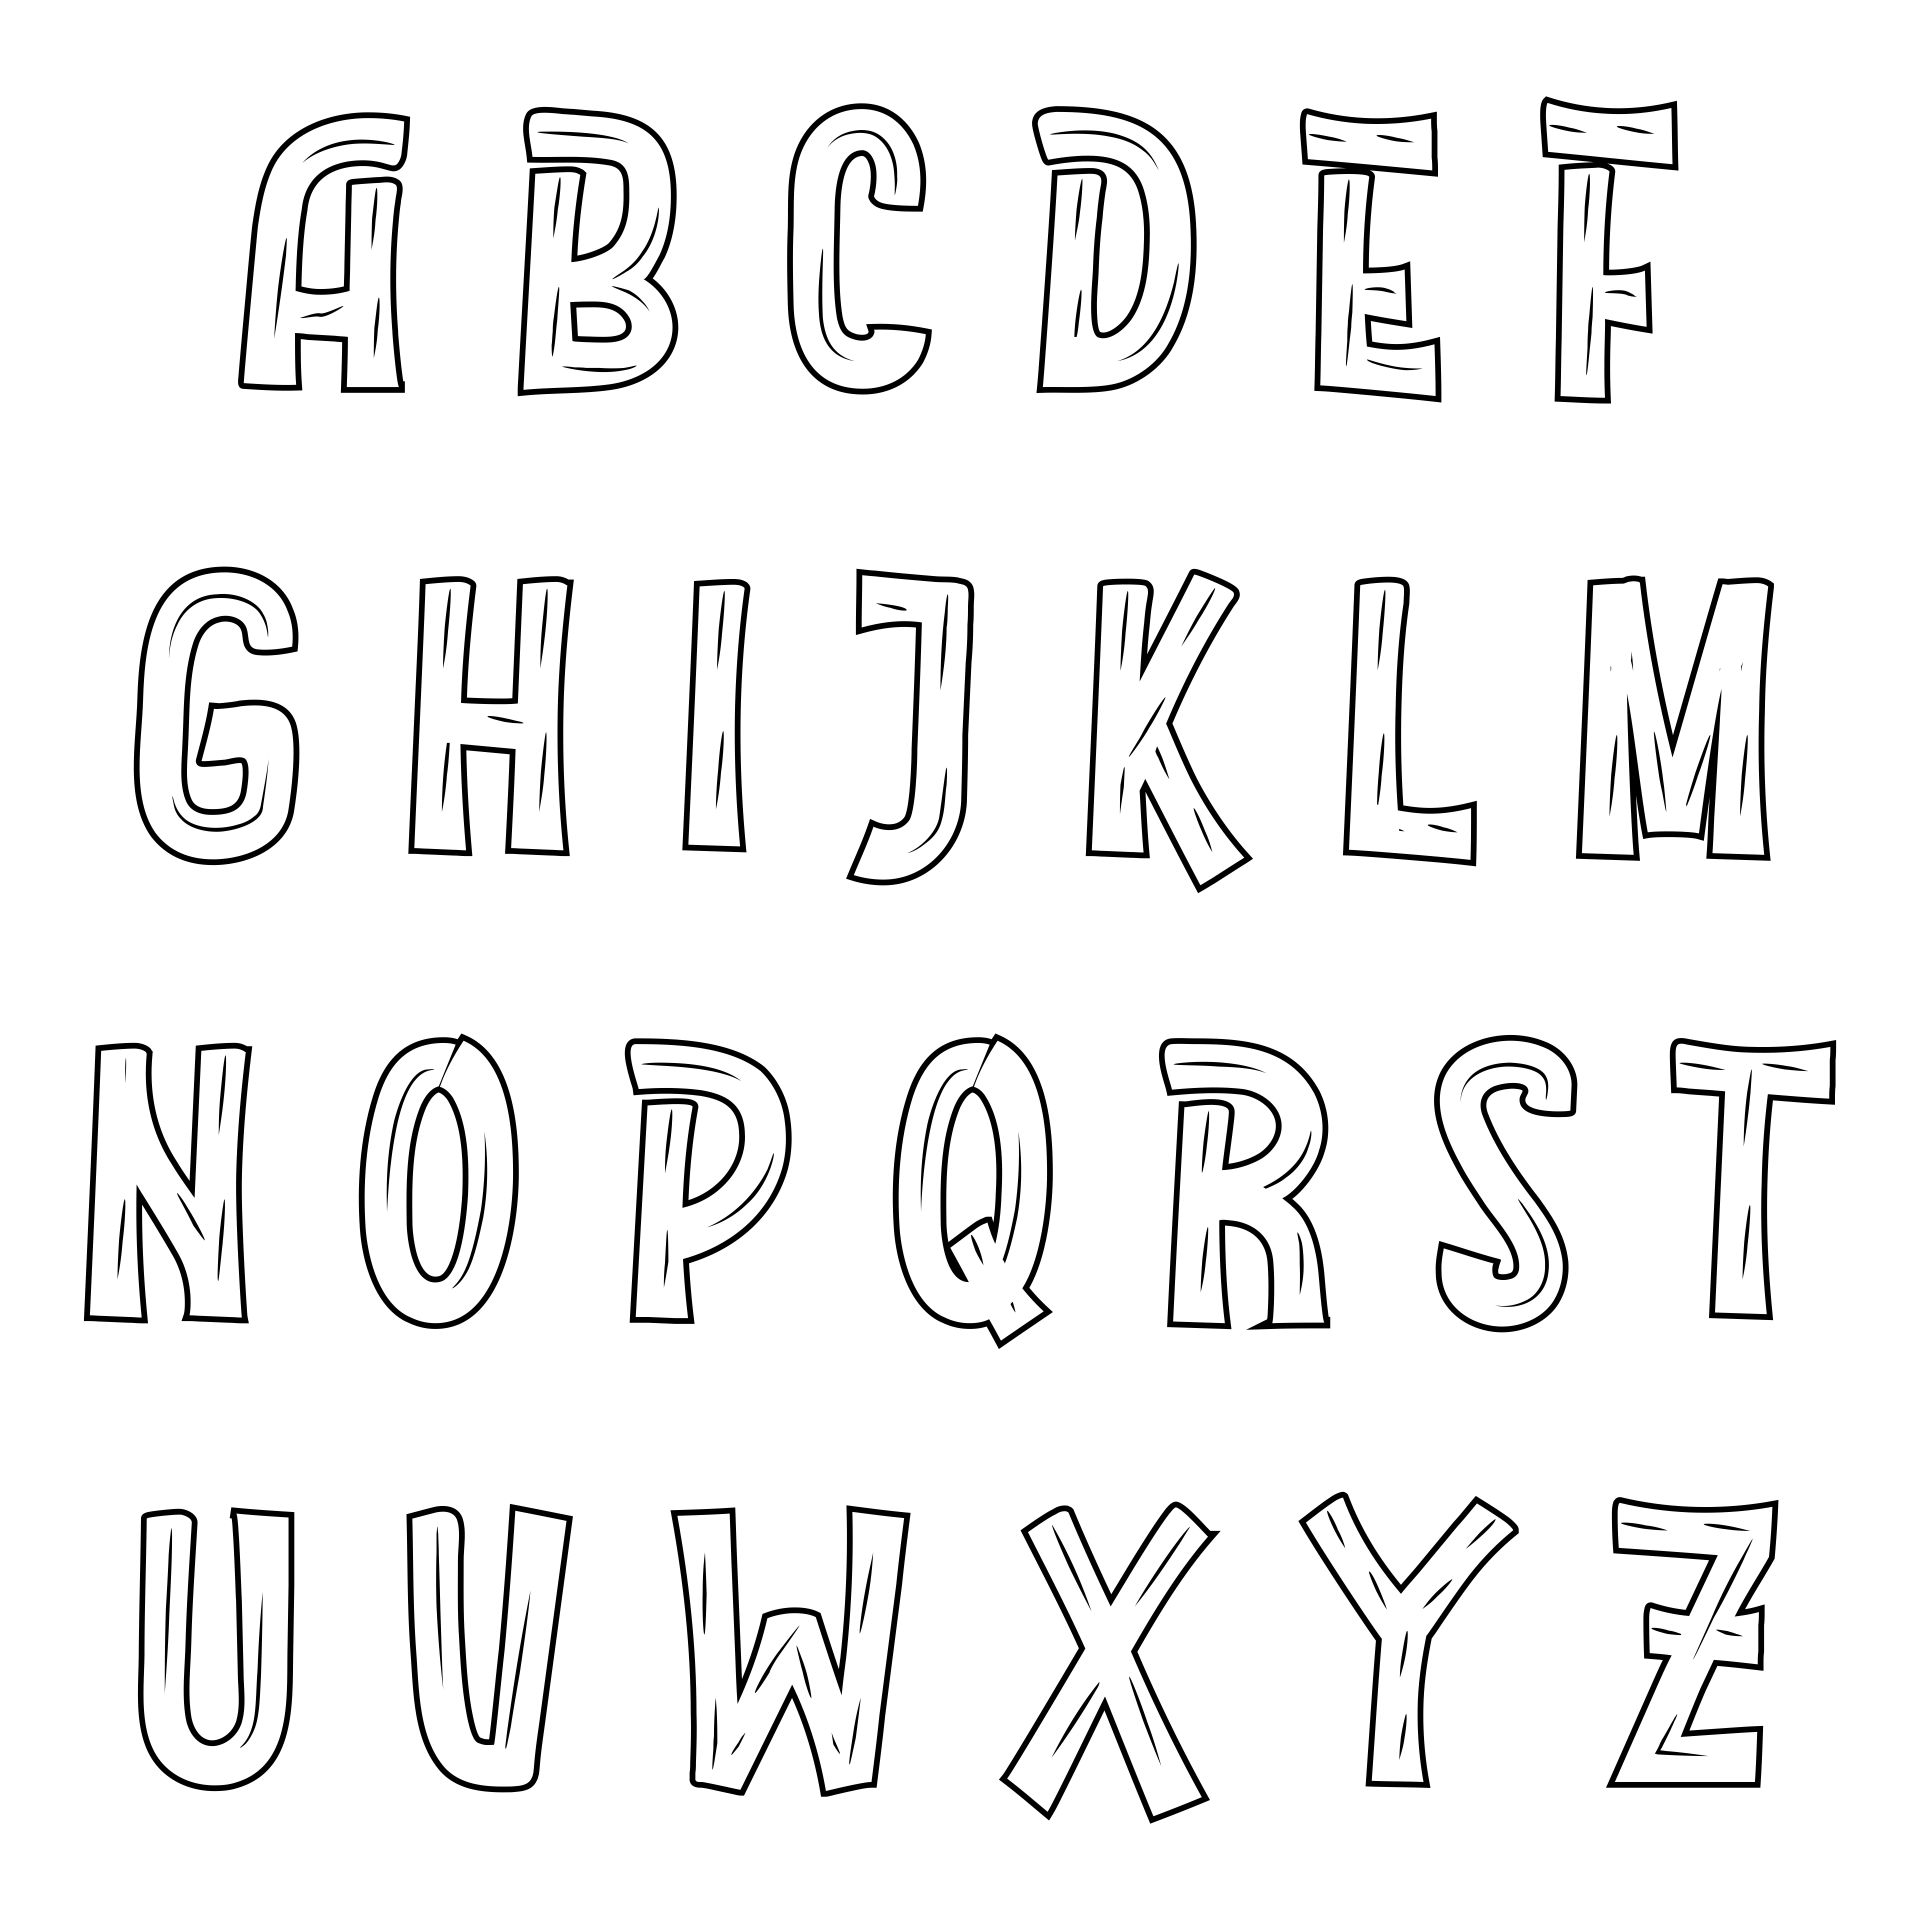 8 Best Images of Printable Letters In Different Fonts - Cool Font ...